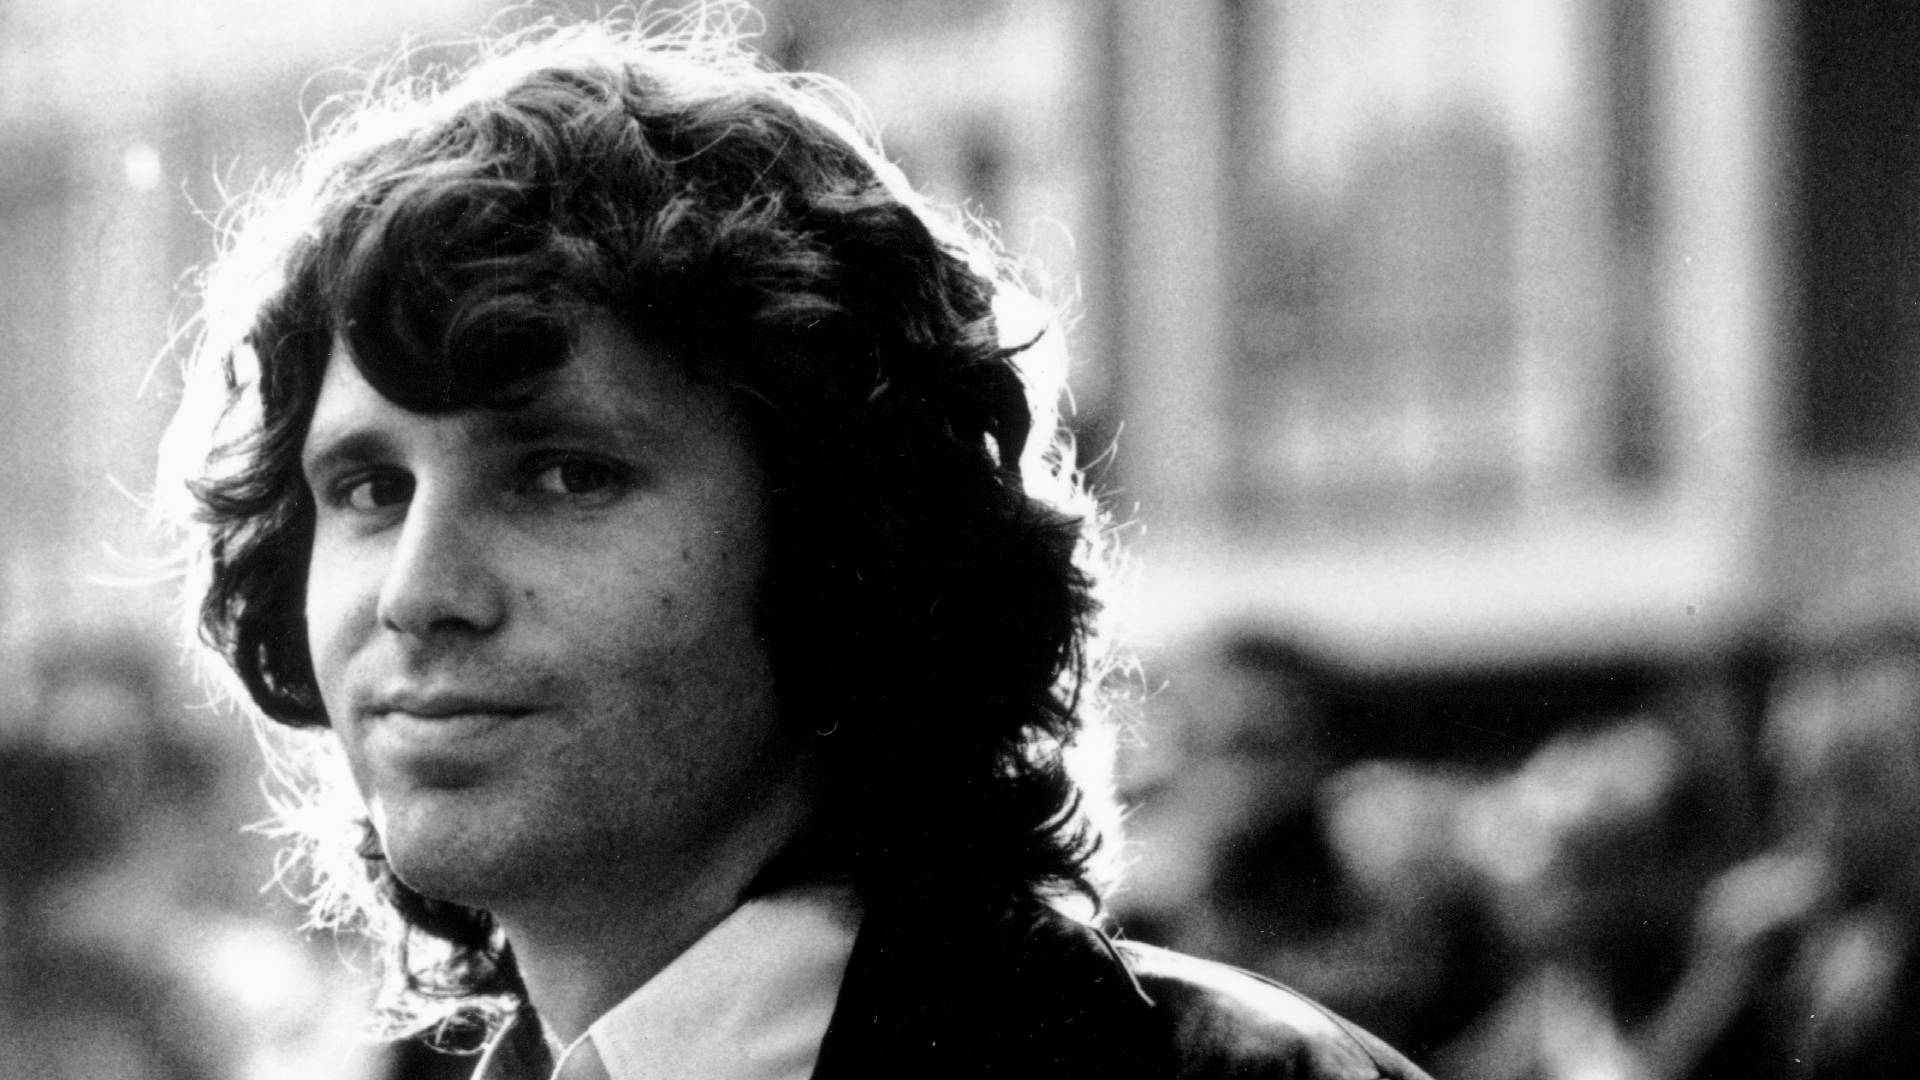 Legendary Jim Morrison with a Charming Smile Wallpaper